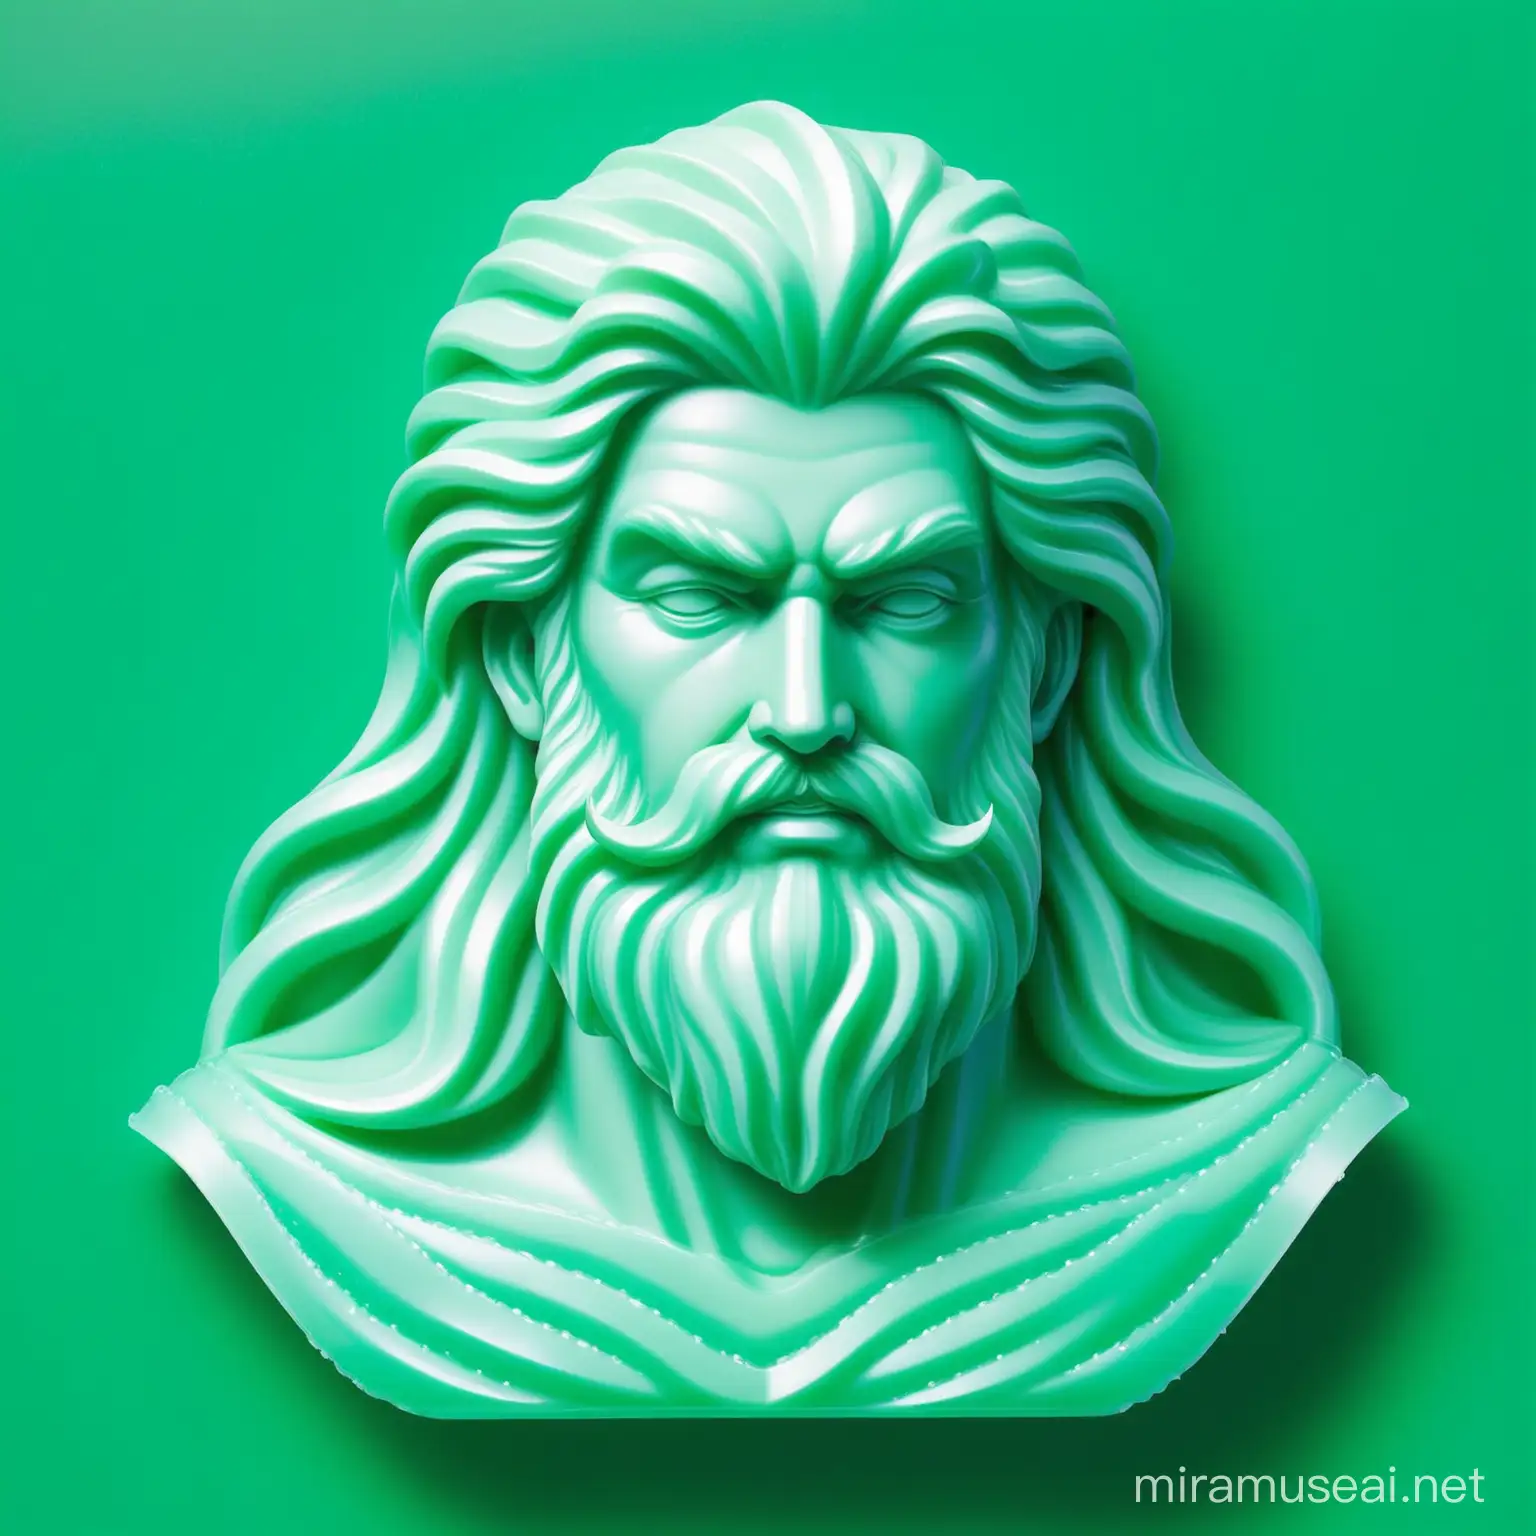 Poseidon made by recycled plastics with a green background